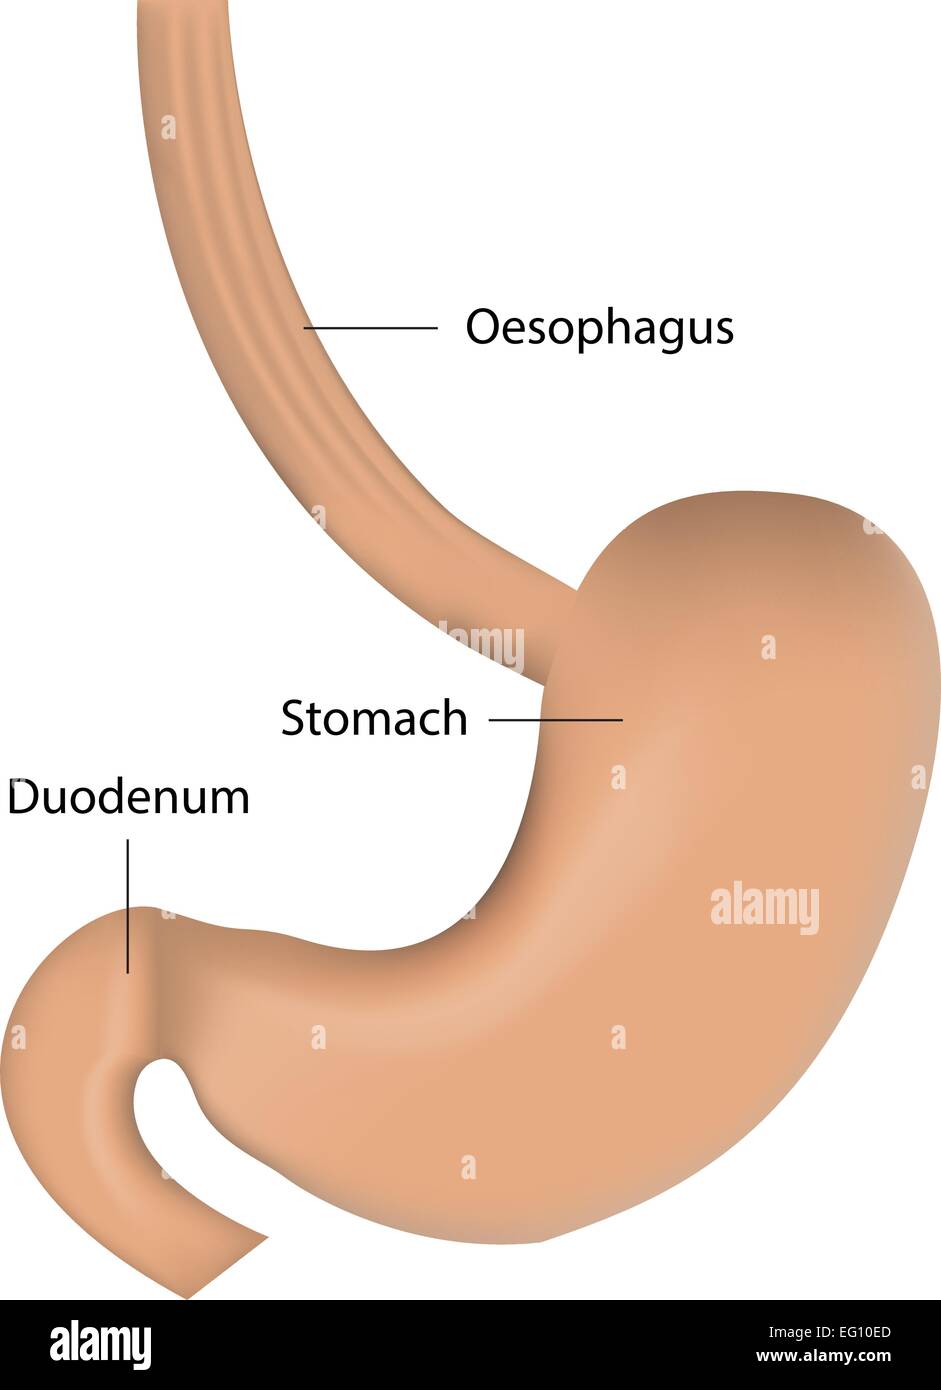 Stomach and Oesophagus Stock Vector